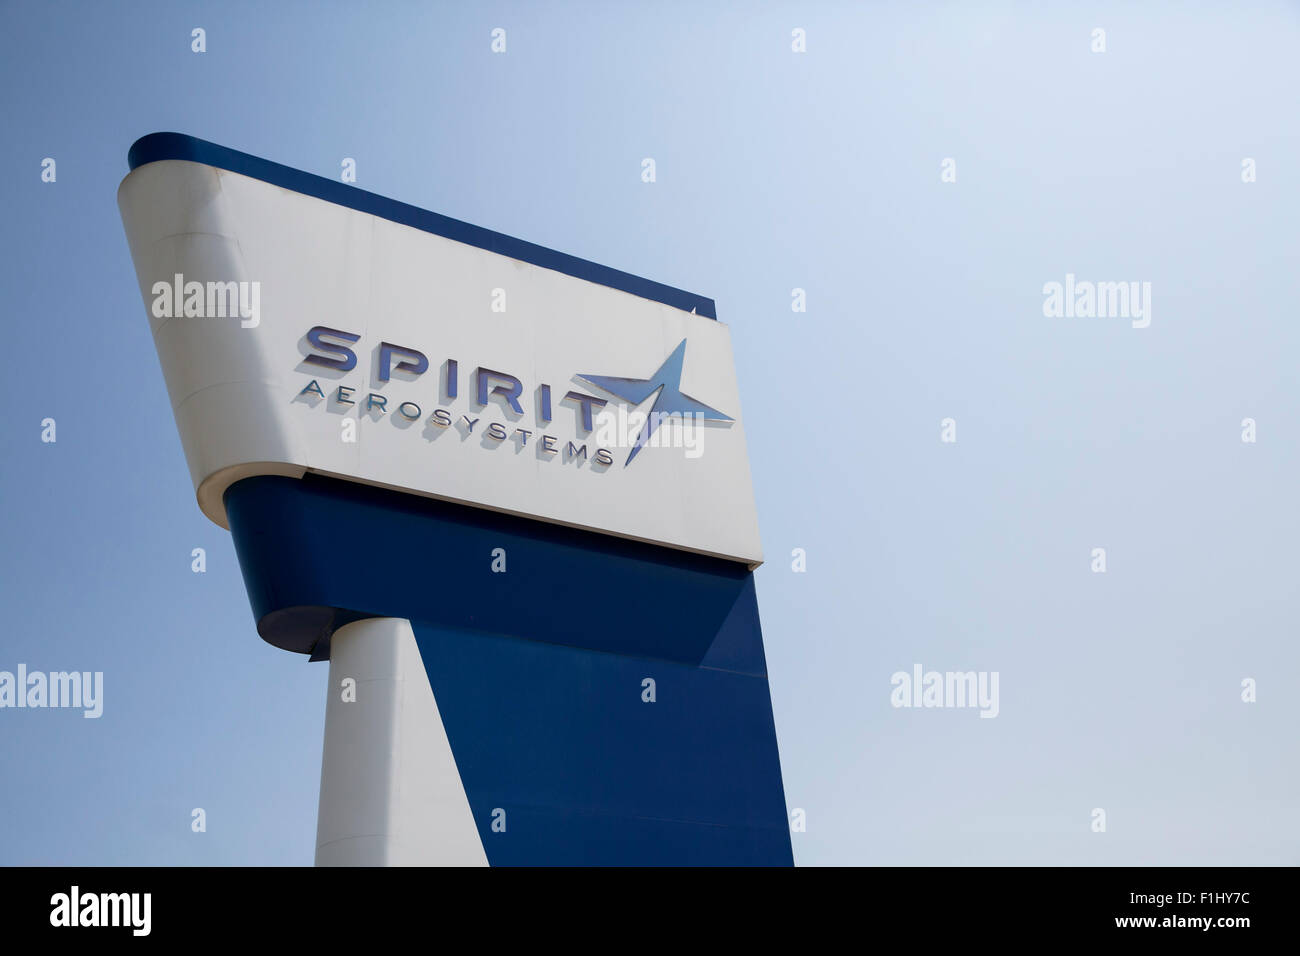 A logo sign outside of the headquarters of Spirit AeroSystems, Inc., in Wichita, Kansas, on August 22, 2015. Stock Photo